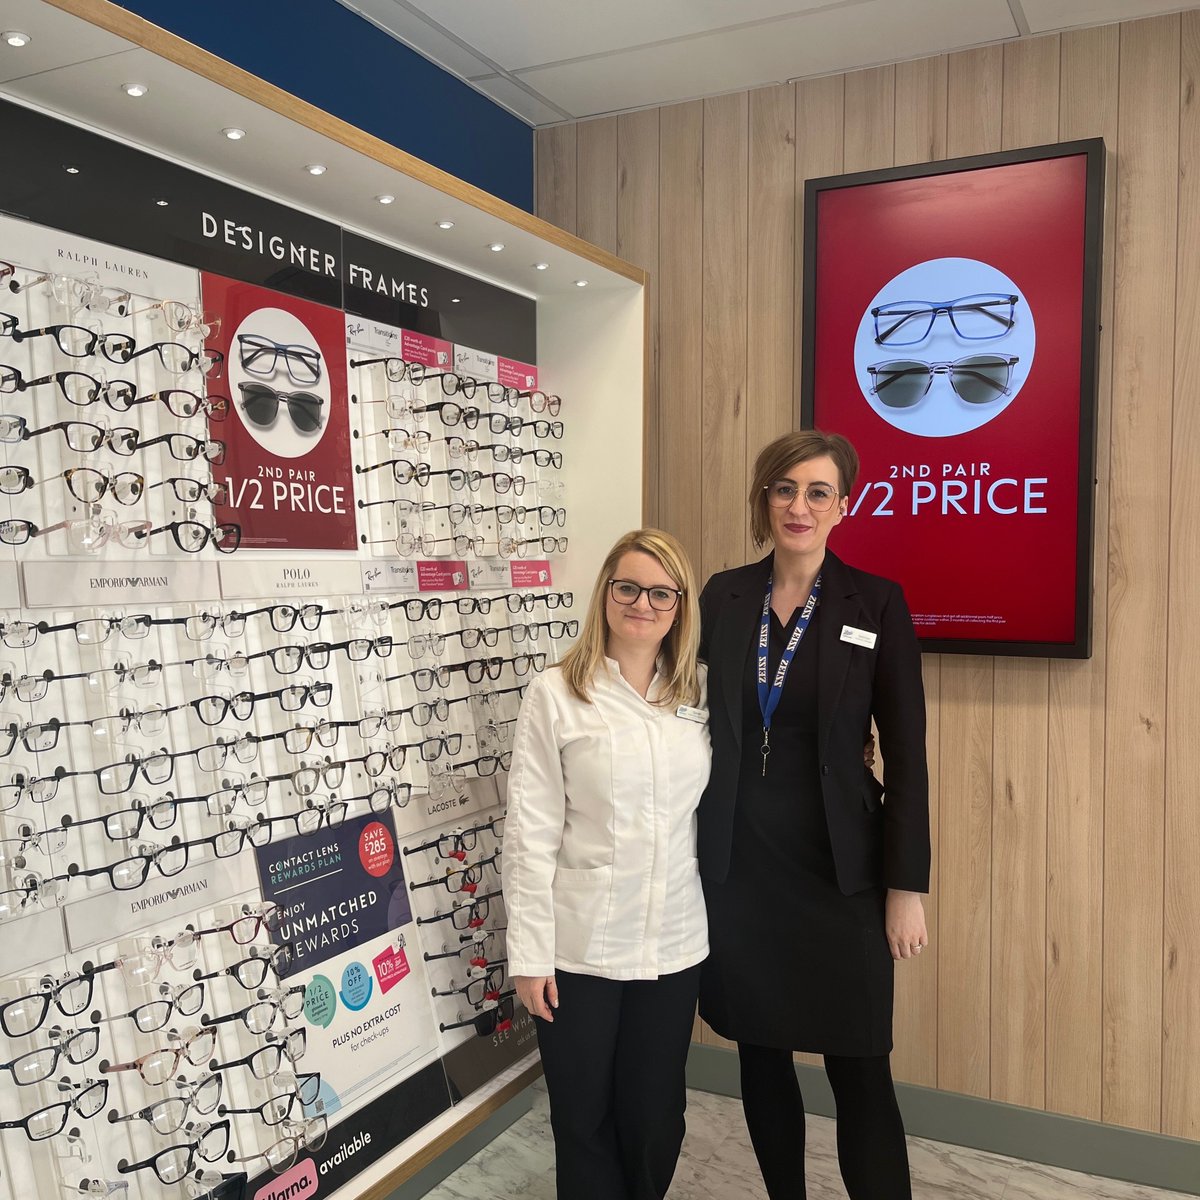 From designer glasses to Boots Eyewear, @BootsUK Opticians have a range of frames to suit your style & taste at a price you want. Did you know you buy any pair of glasses or prescription sunglasses and get a 2nd pair 1/2 price? 🕶️ 👓 #Northwich